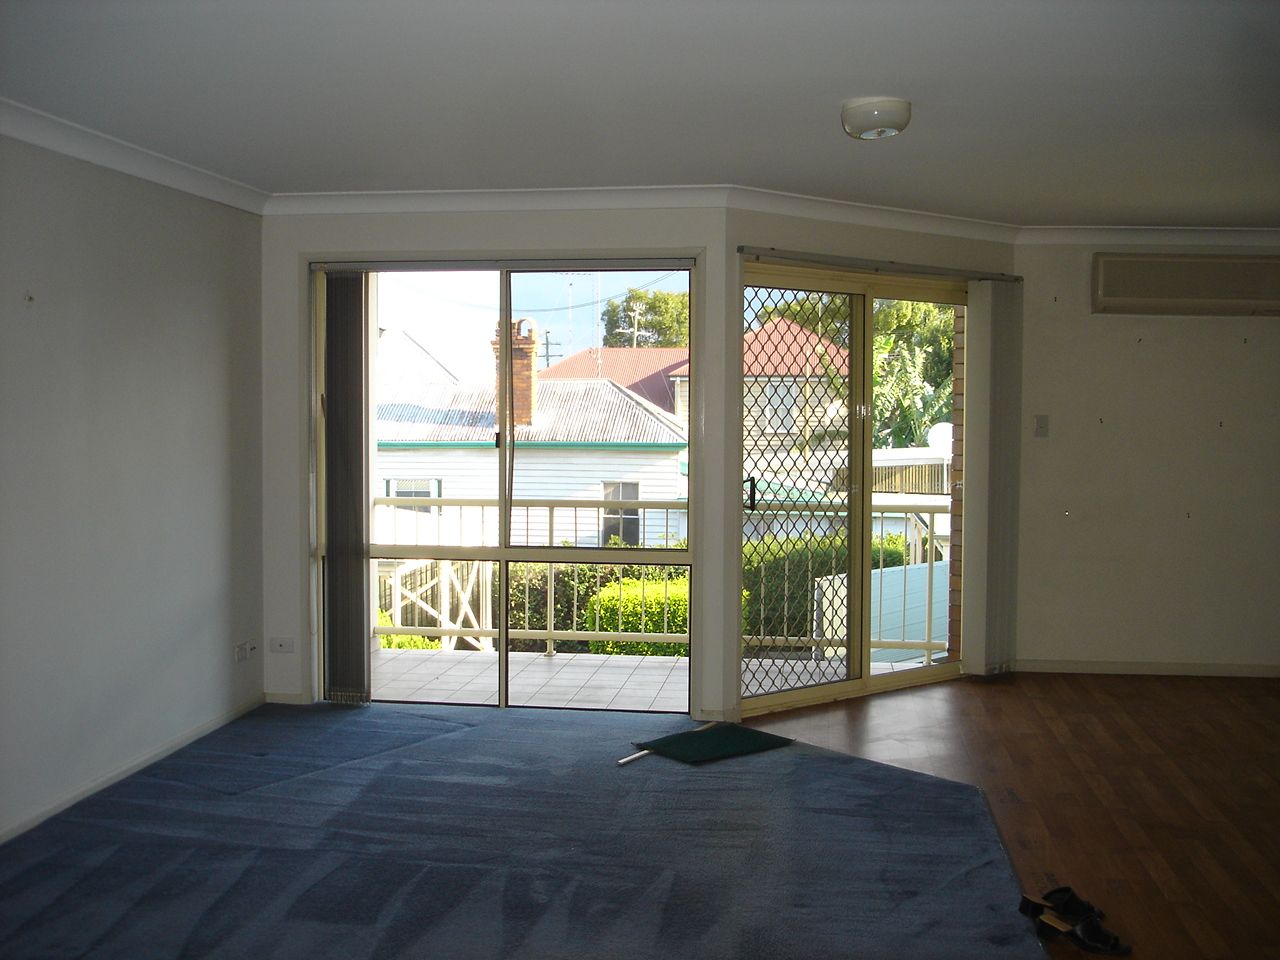 2 bedrooms Apartment / Unit / Flat in Unit 18/5 Clifford Street TOOWOOMBA CITY QLD, 4350